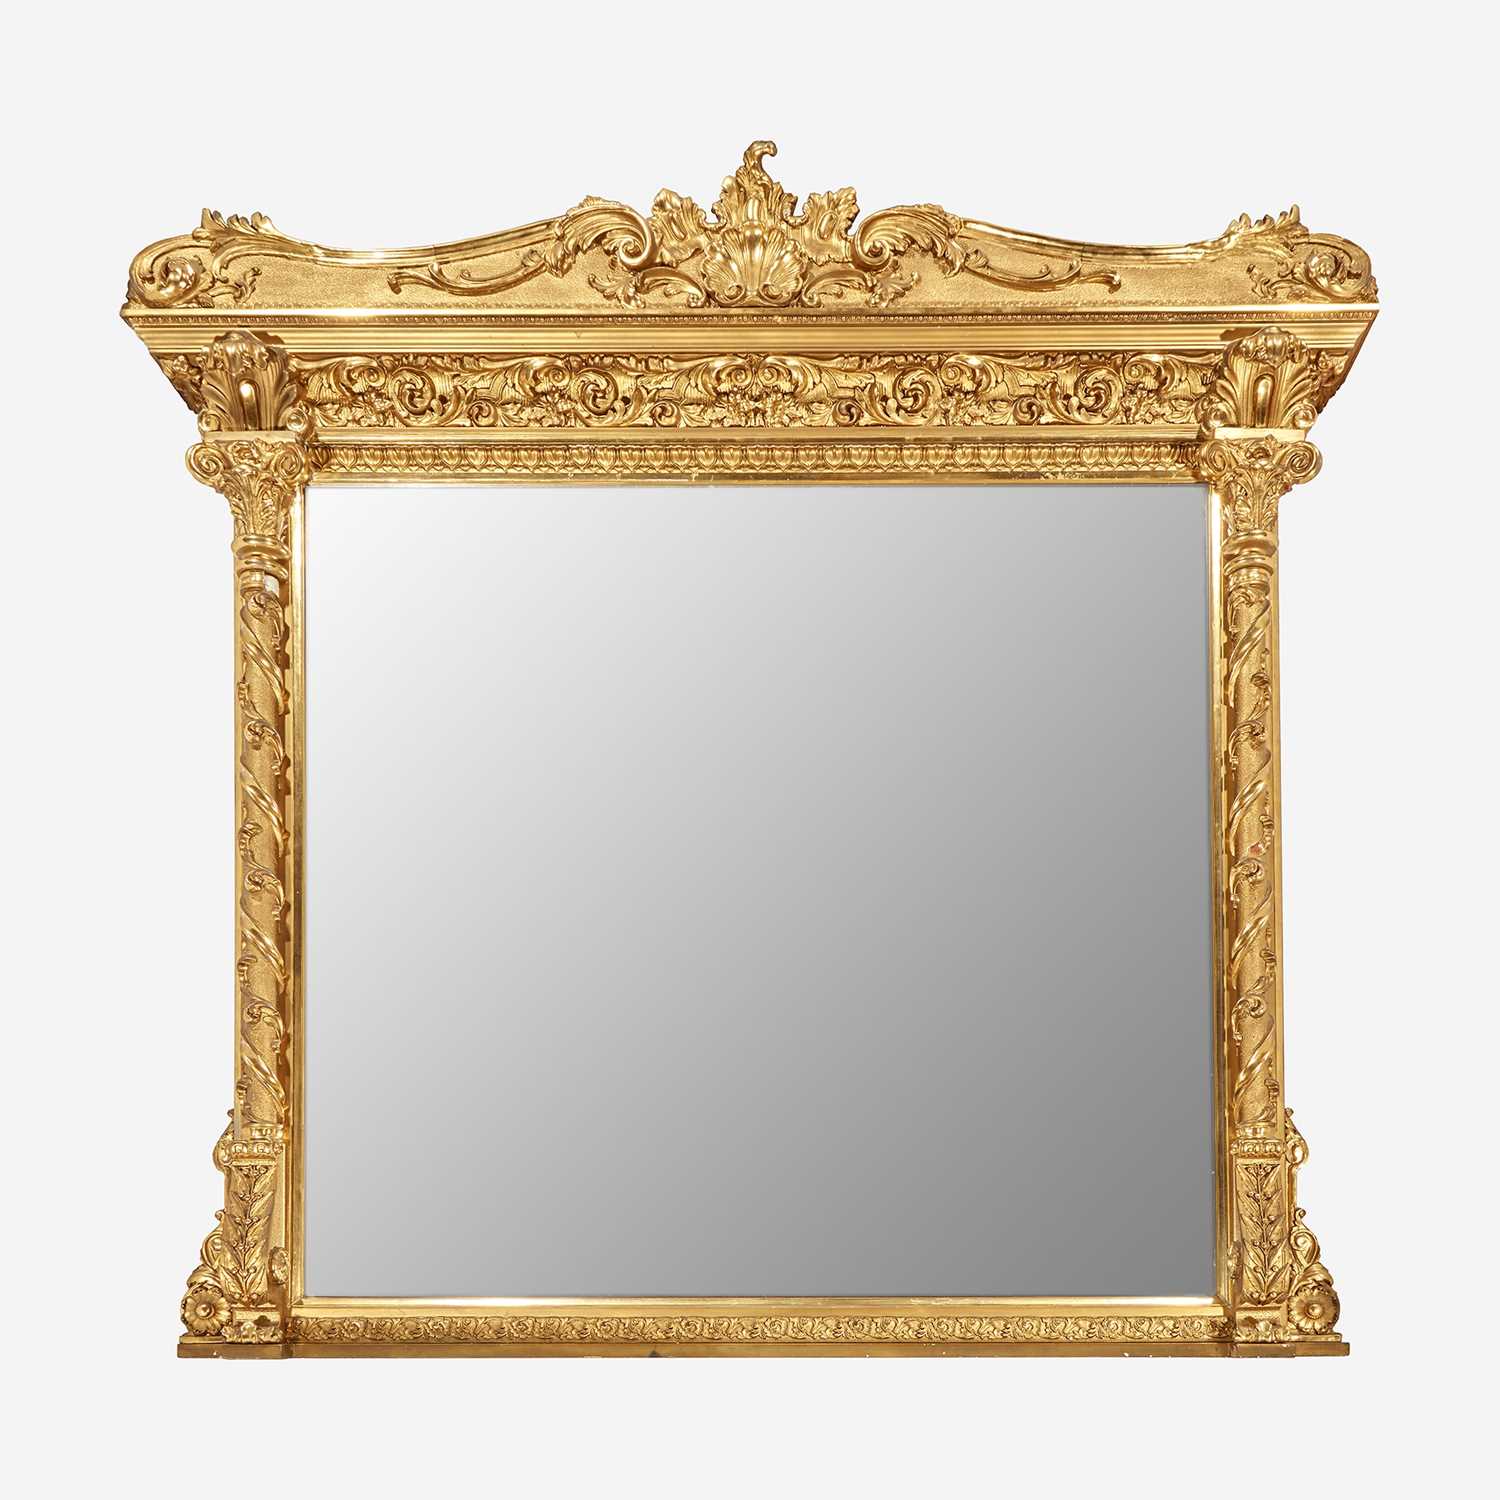 Lot 38 - A Large Classical Giltwood Overmantel Mirror